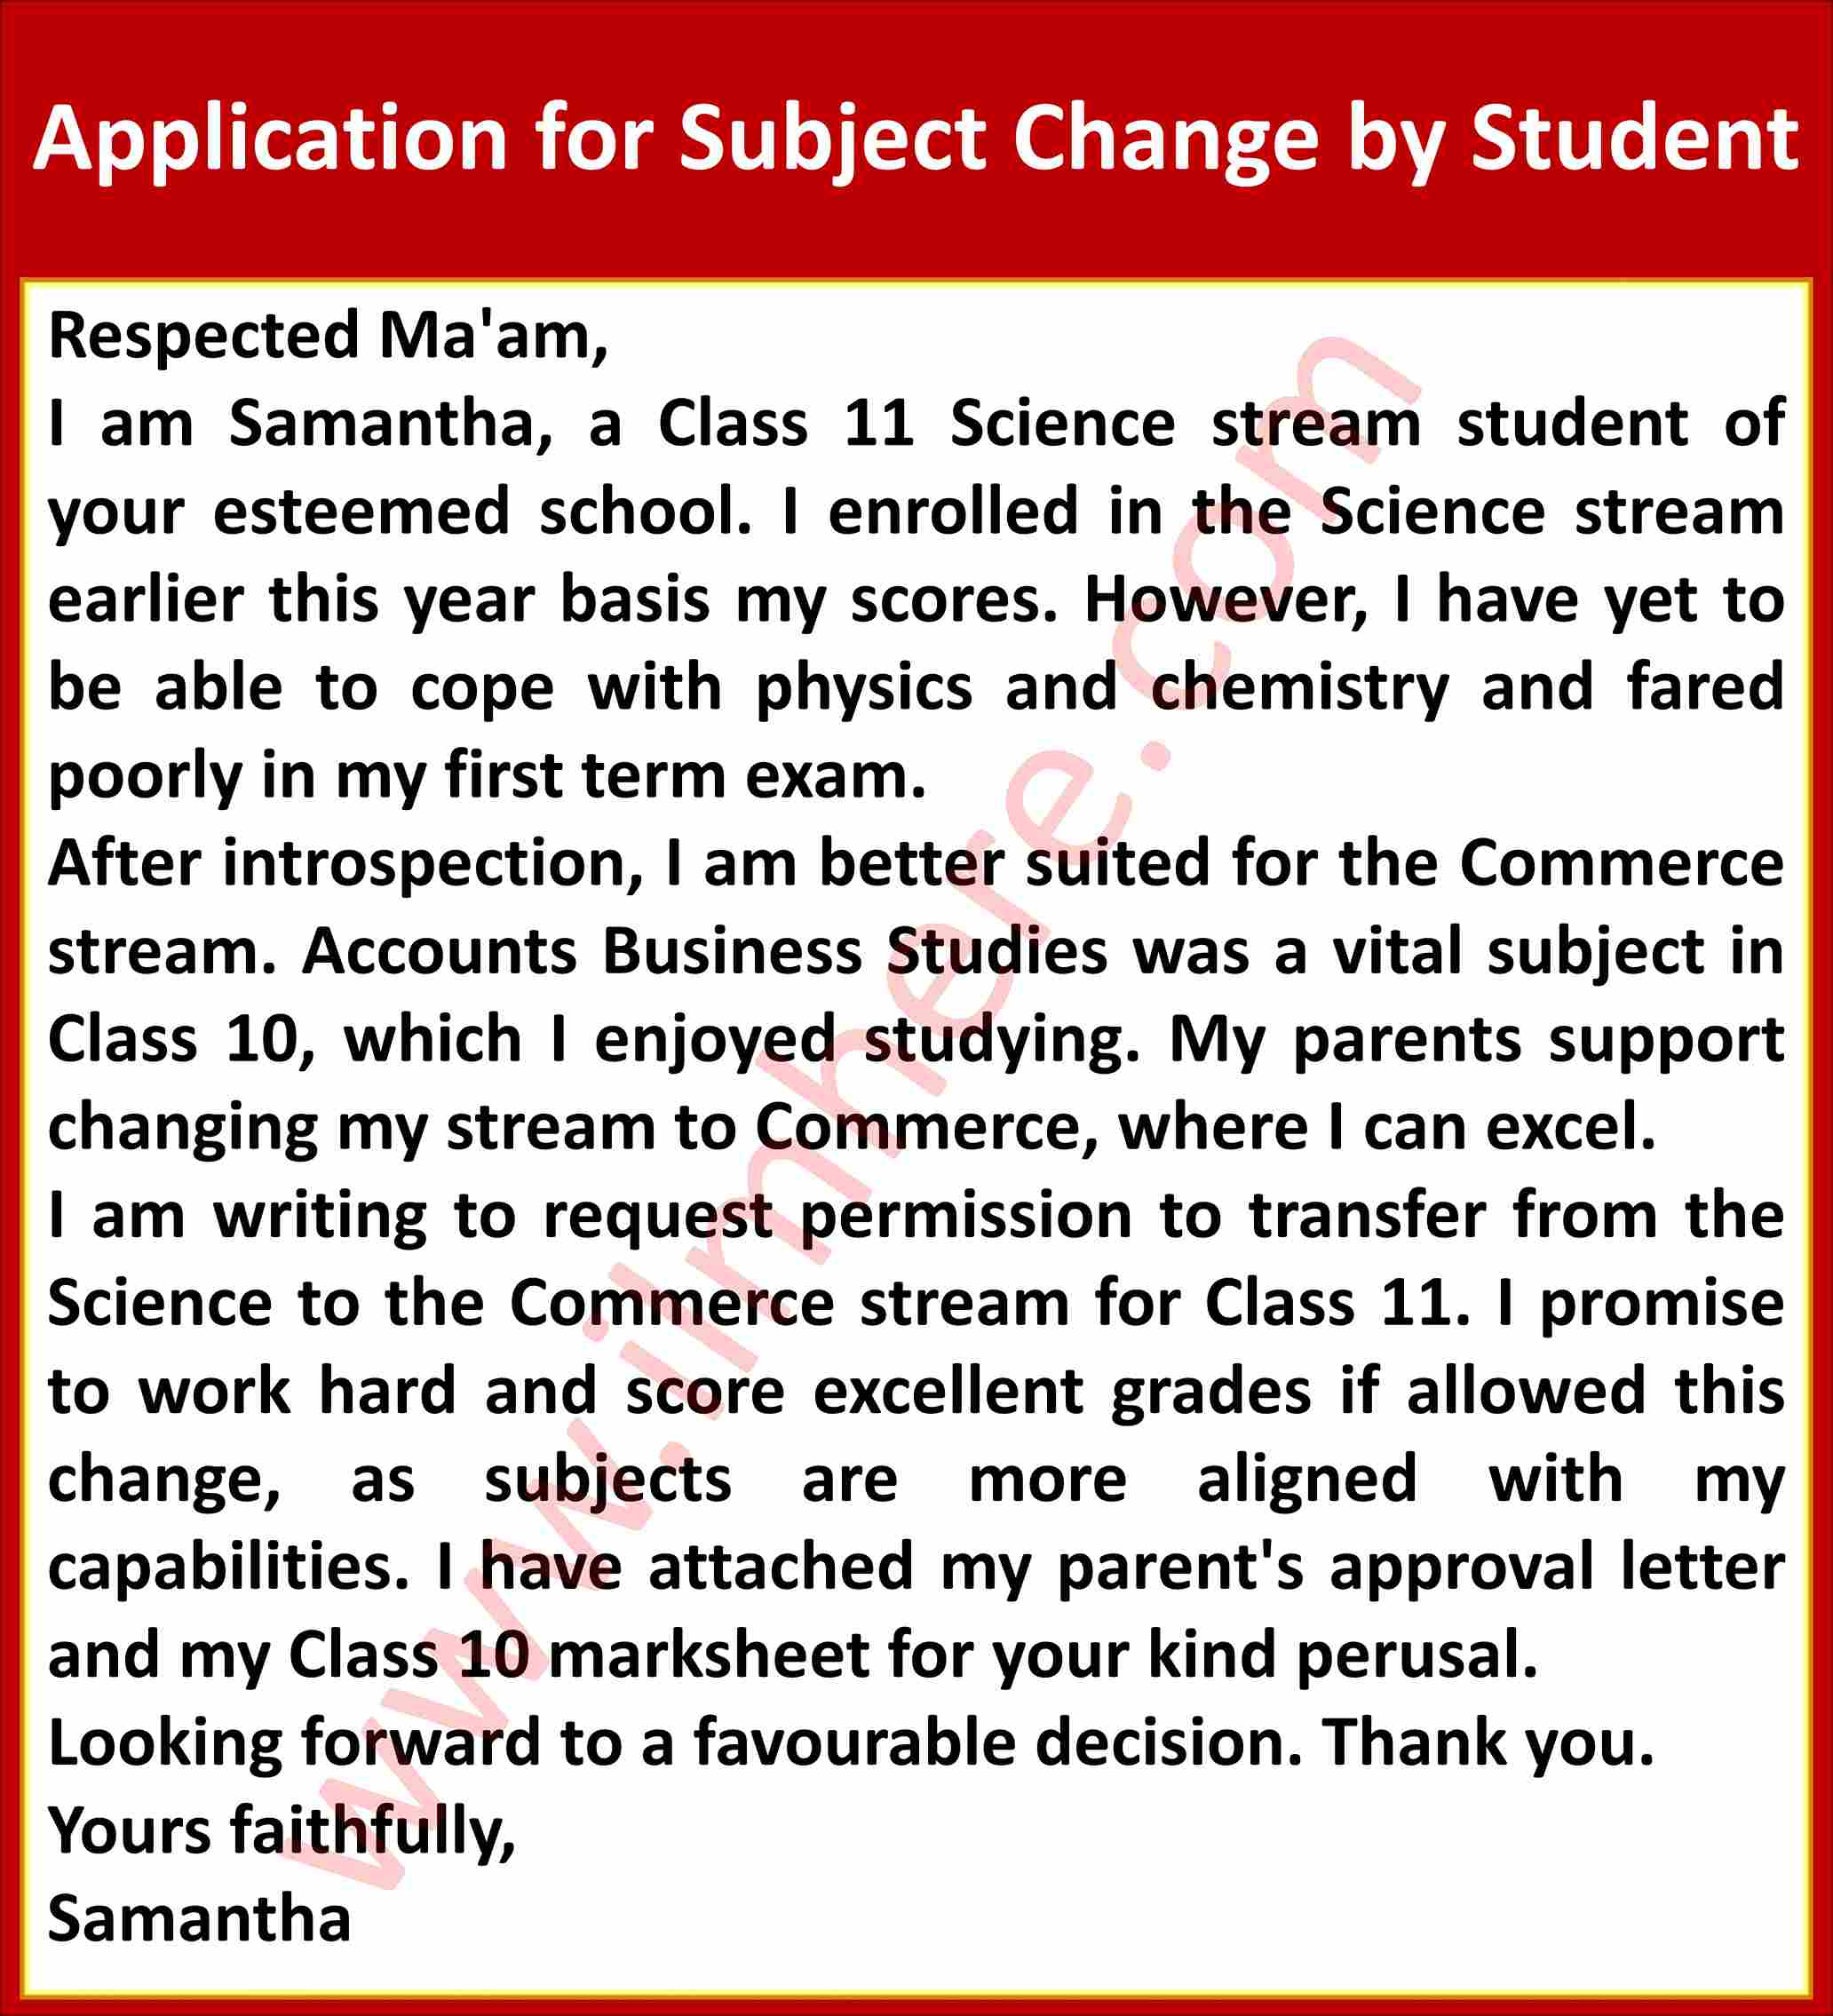 Application for Subject Change by Student